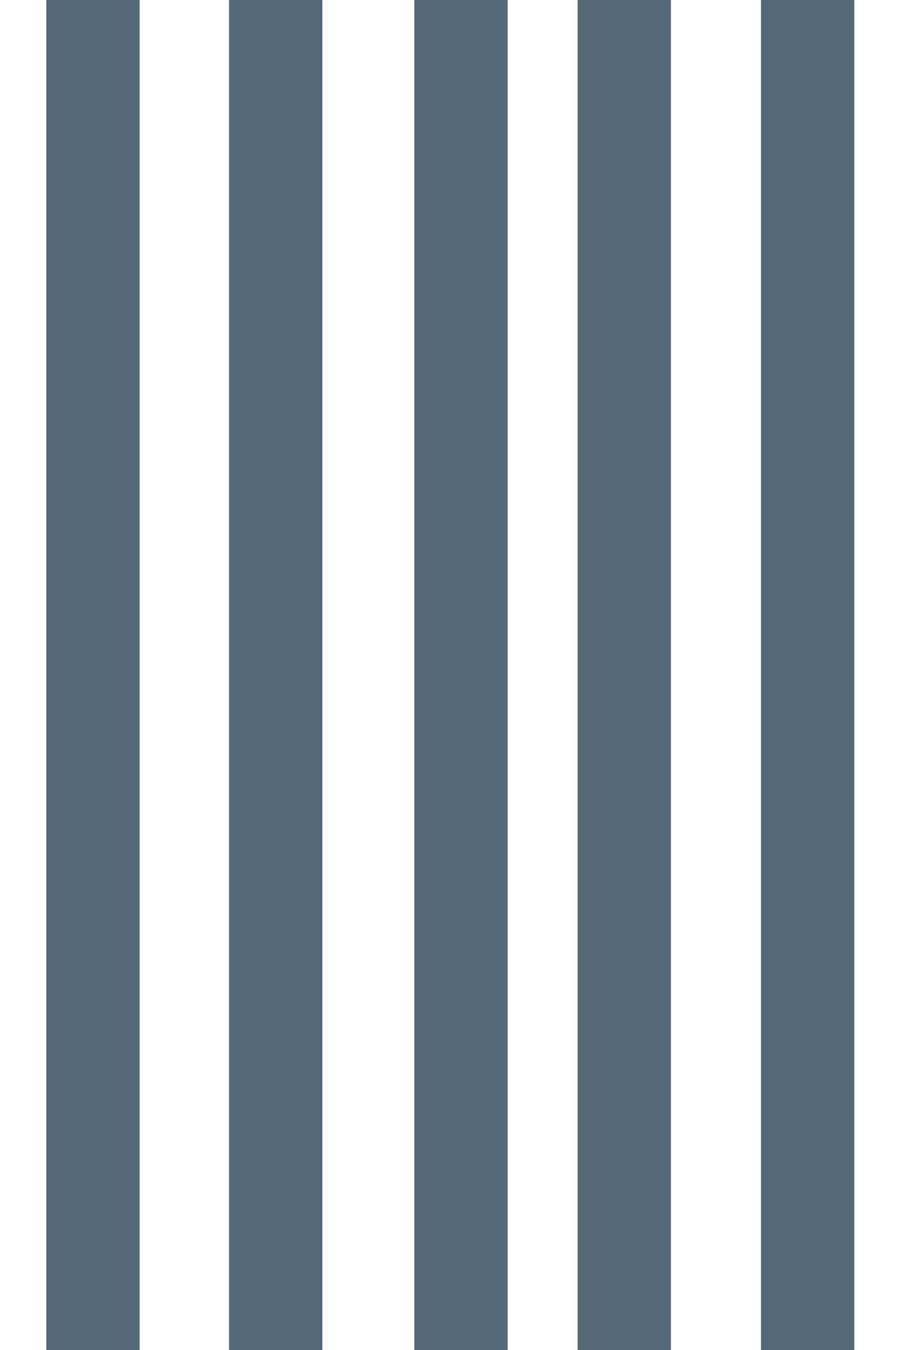 Woolf With Me Fitted Crib Sheet Stripes color_paynes-gray